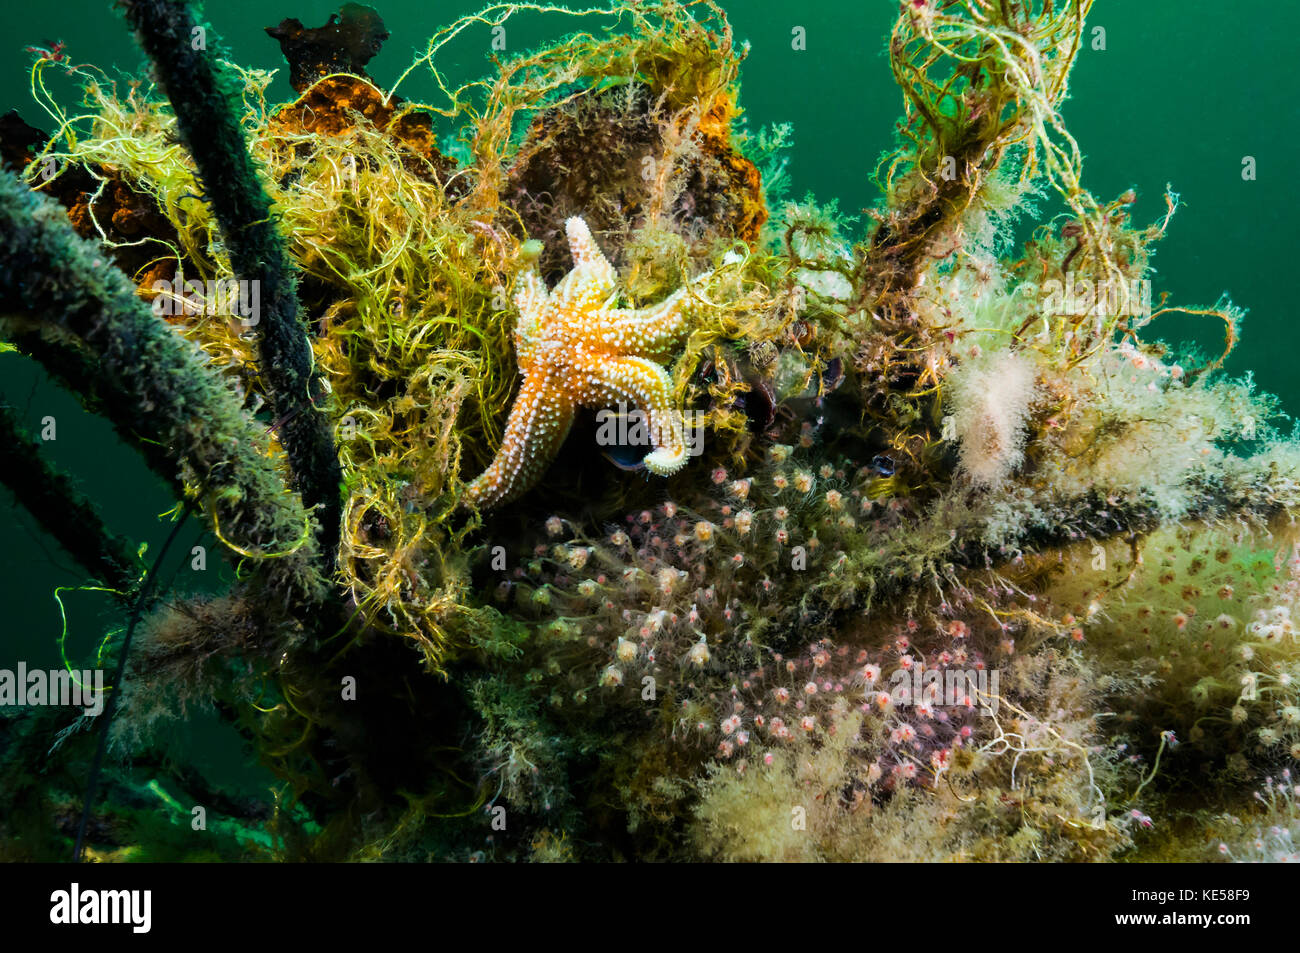 A northern sea star in the cold waters off New Jersey. Stock Photo